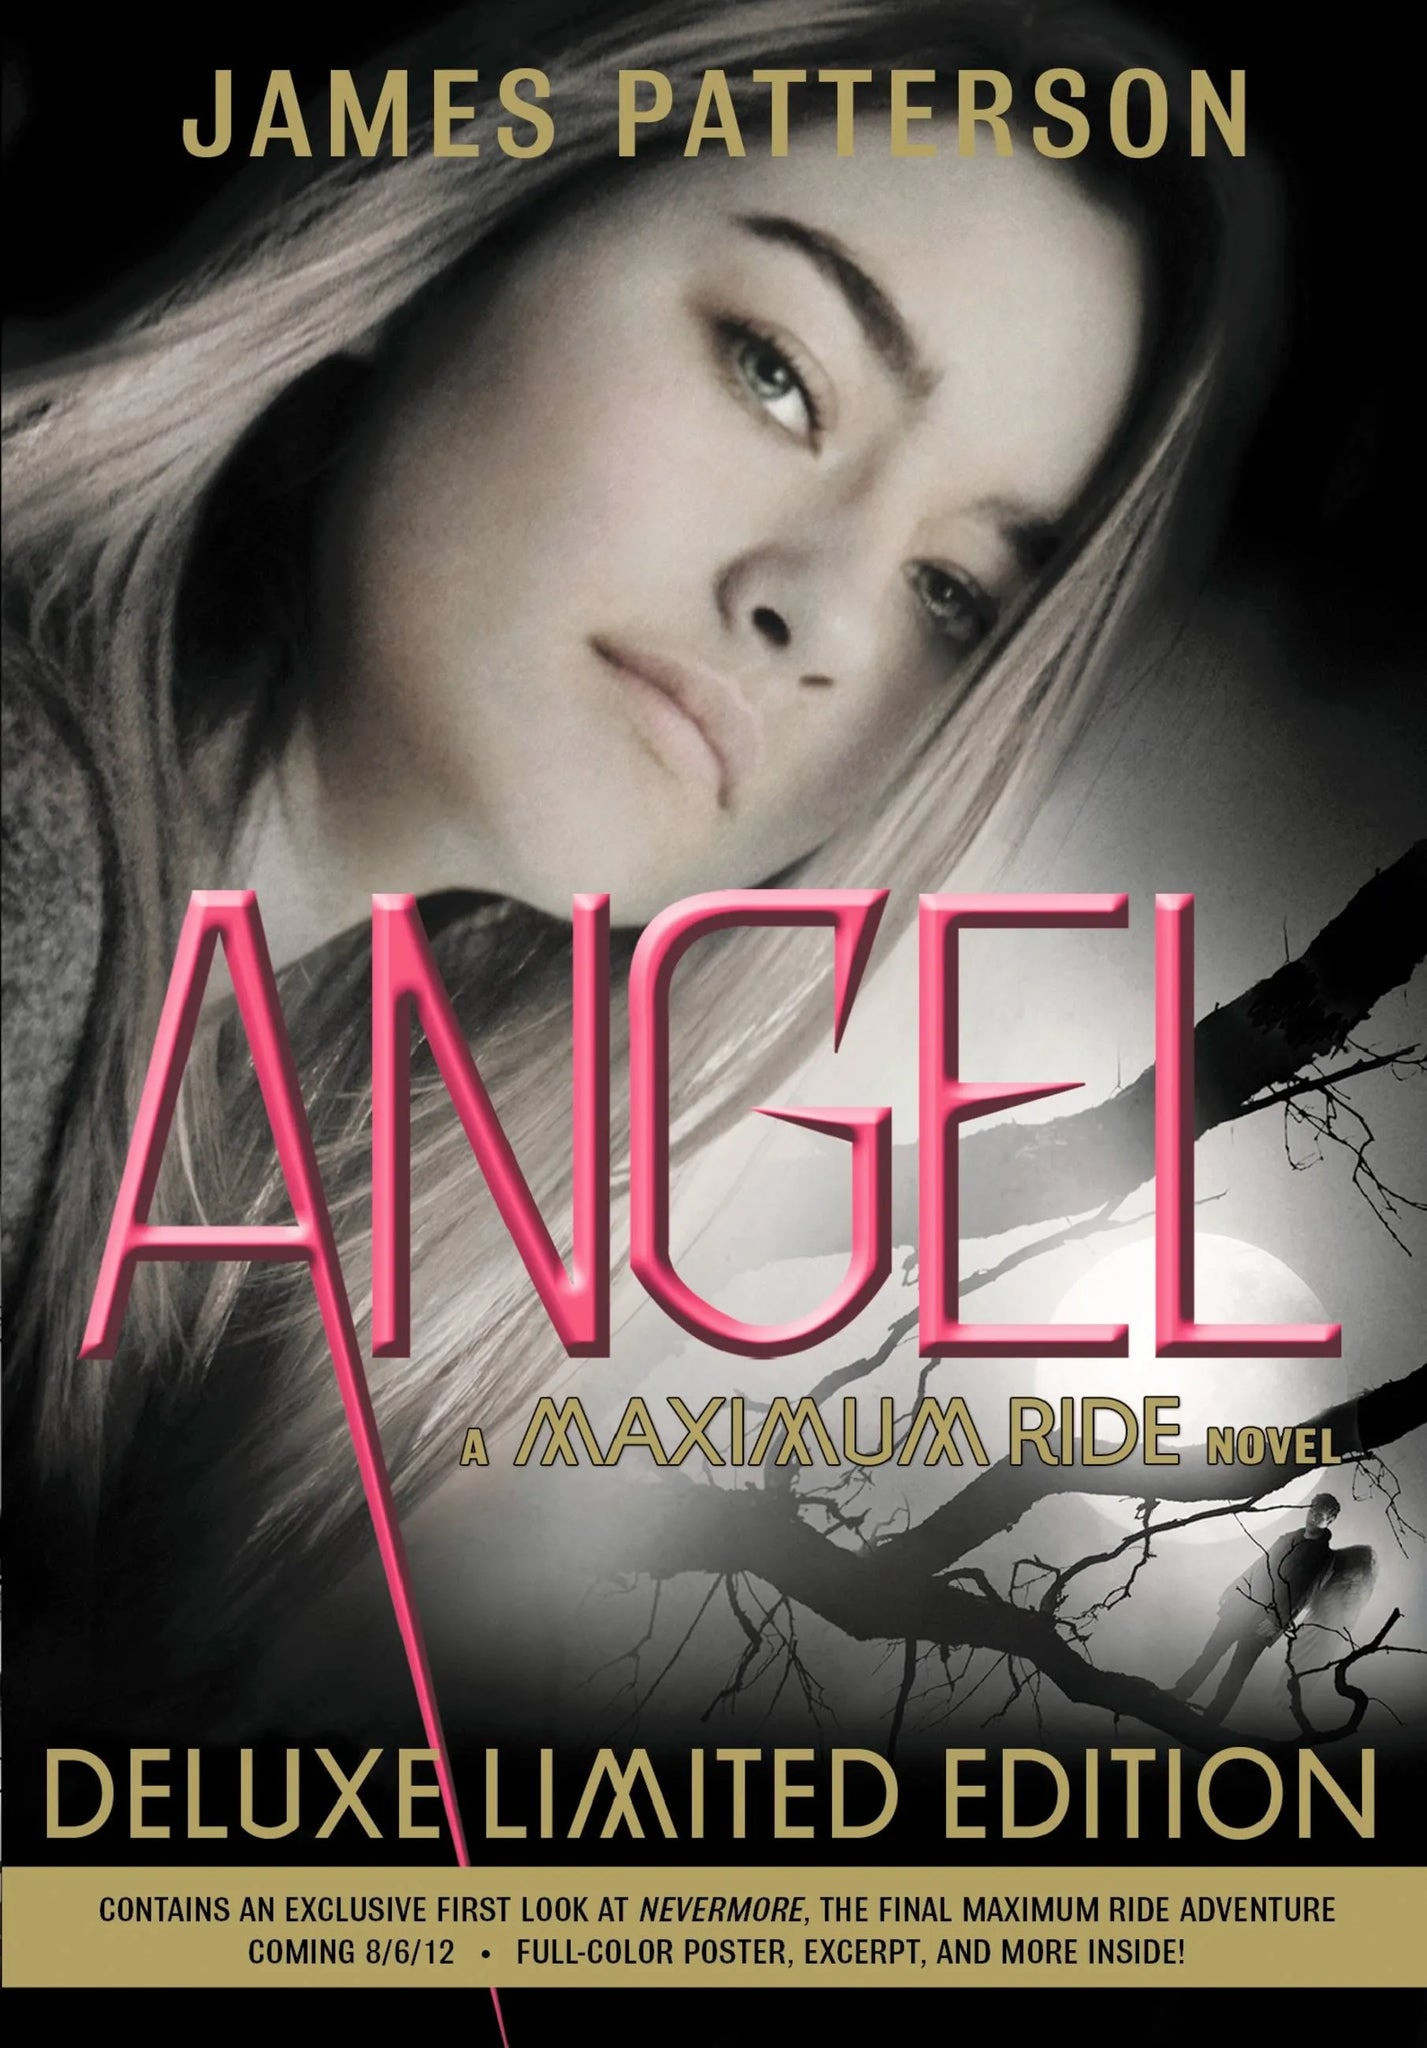 Angel: A Maximum Ride Novel - James Patterson (Pre-Loved)